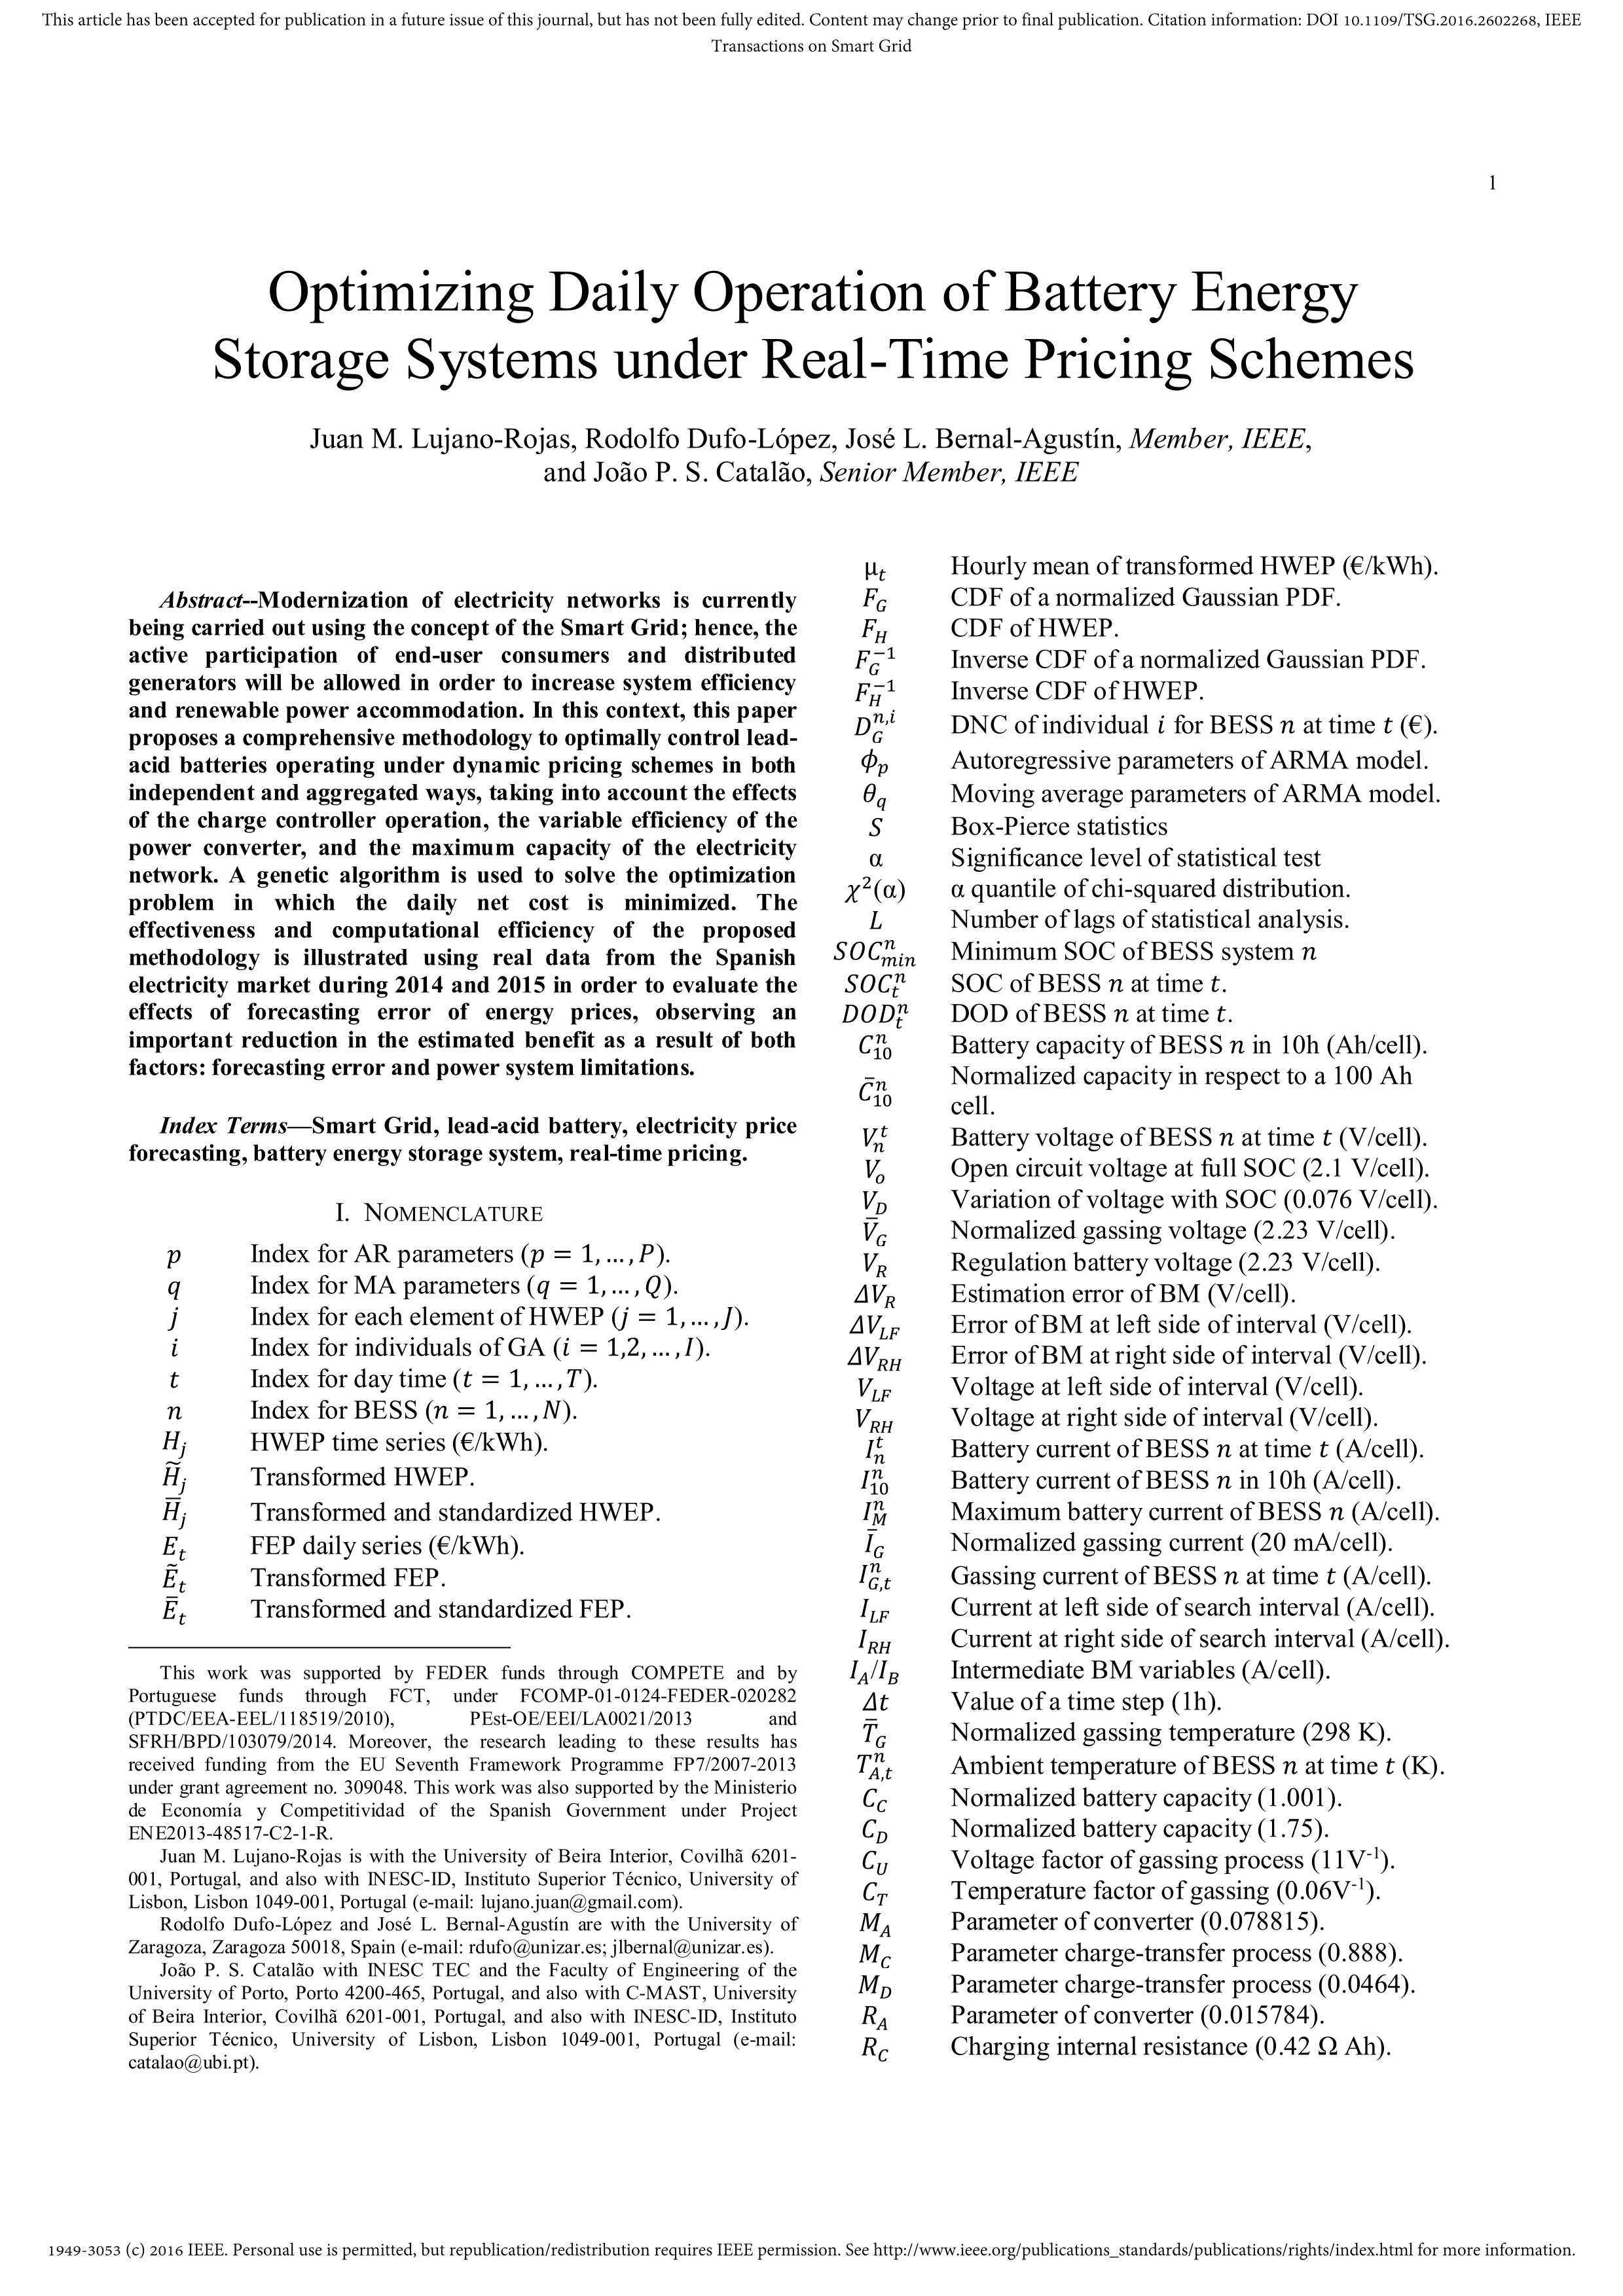 Optimizing daily operation of battery energy storage systems under real-time pricing schemes